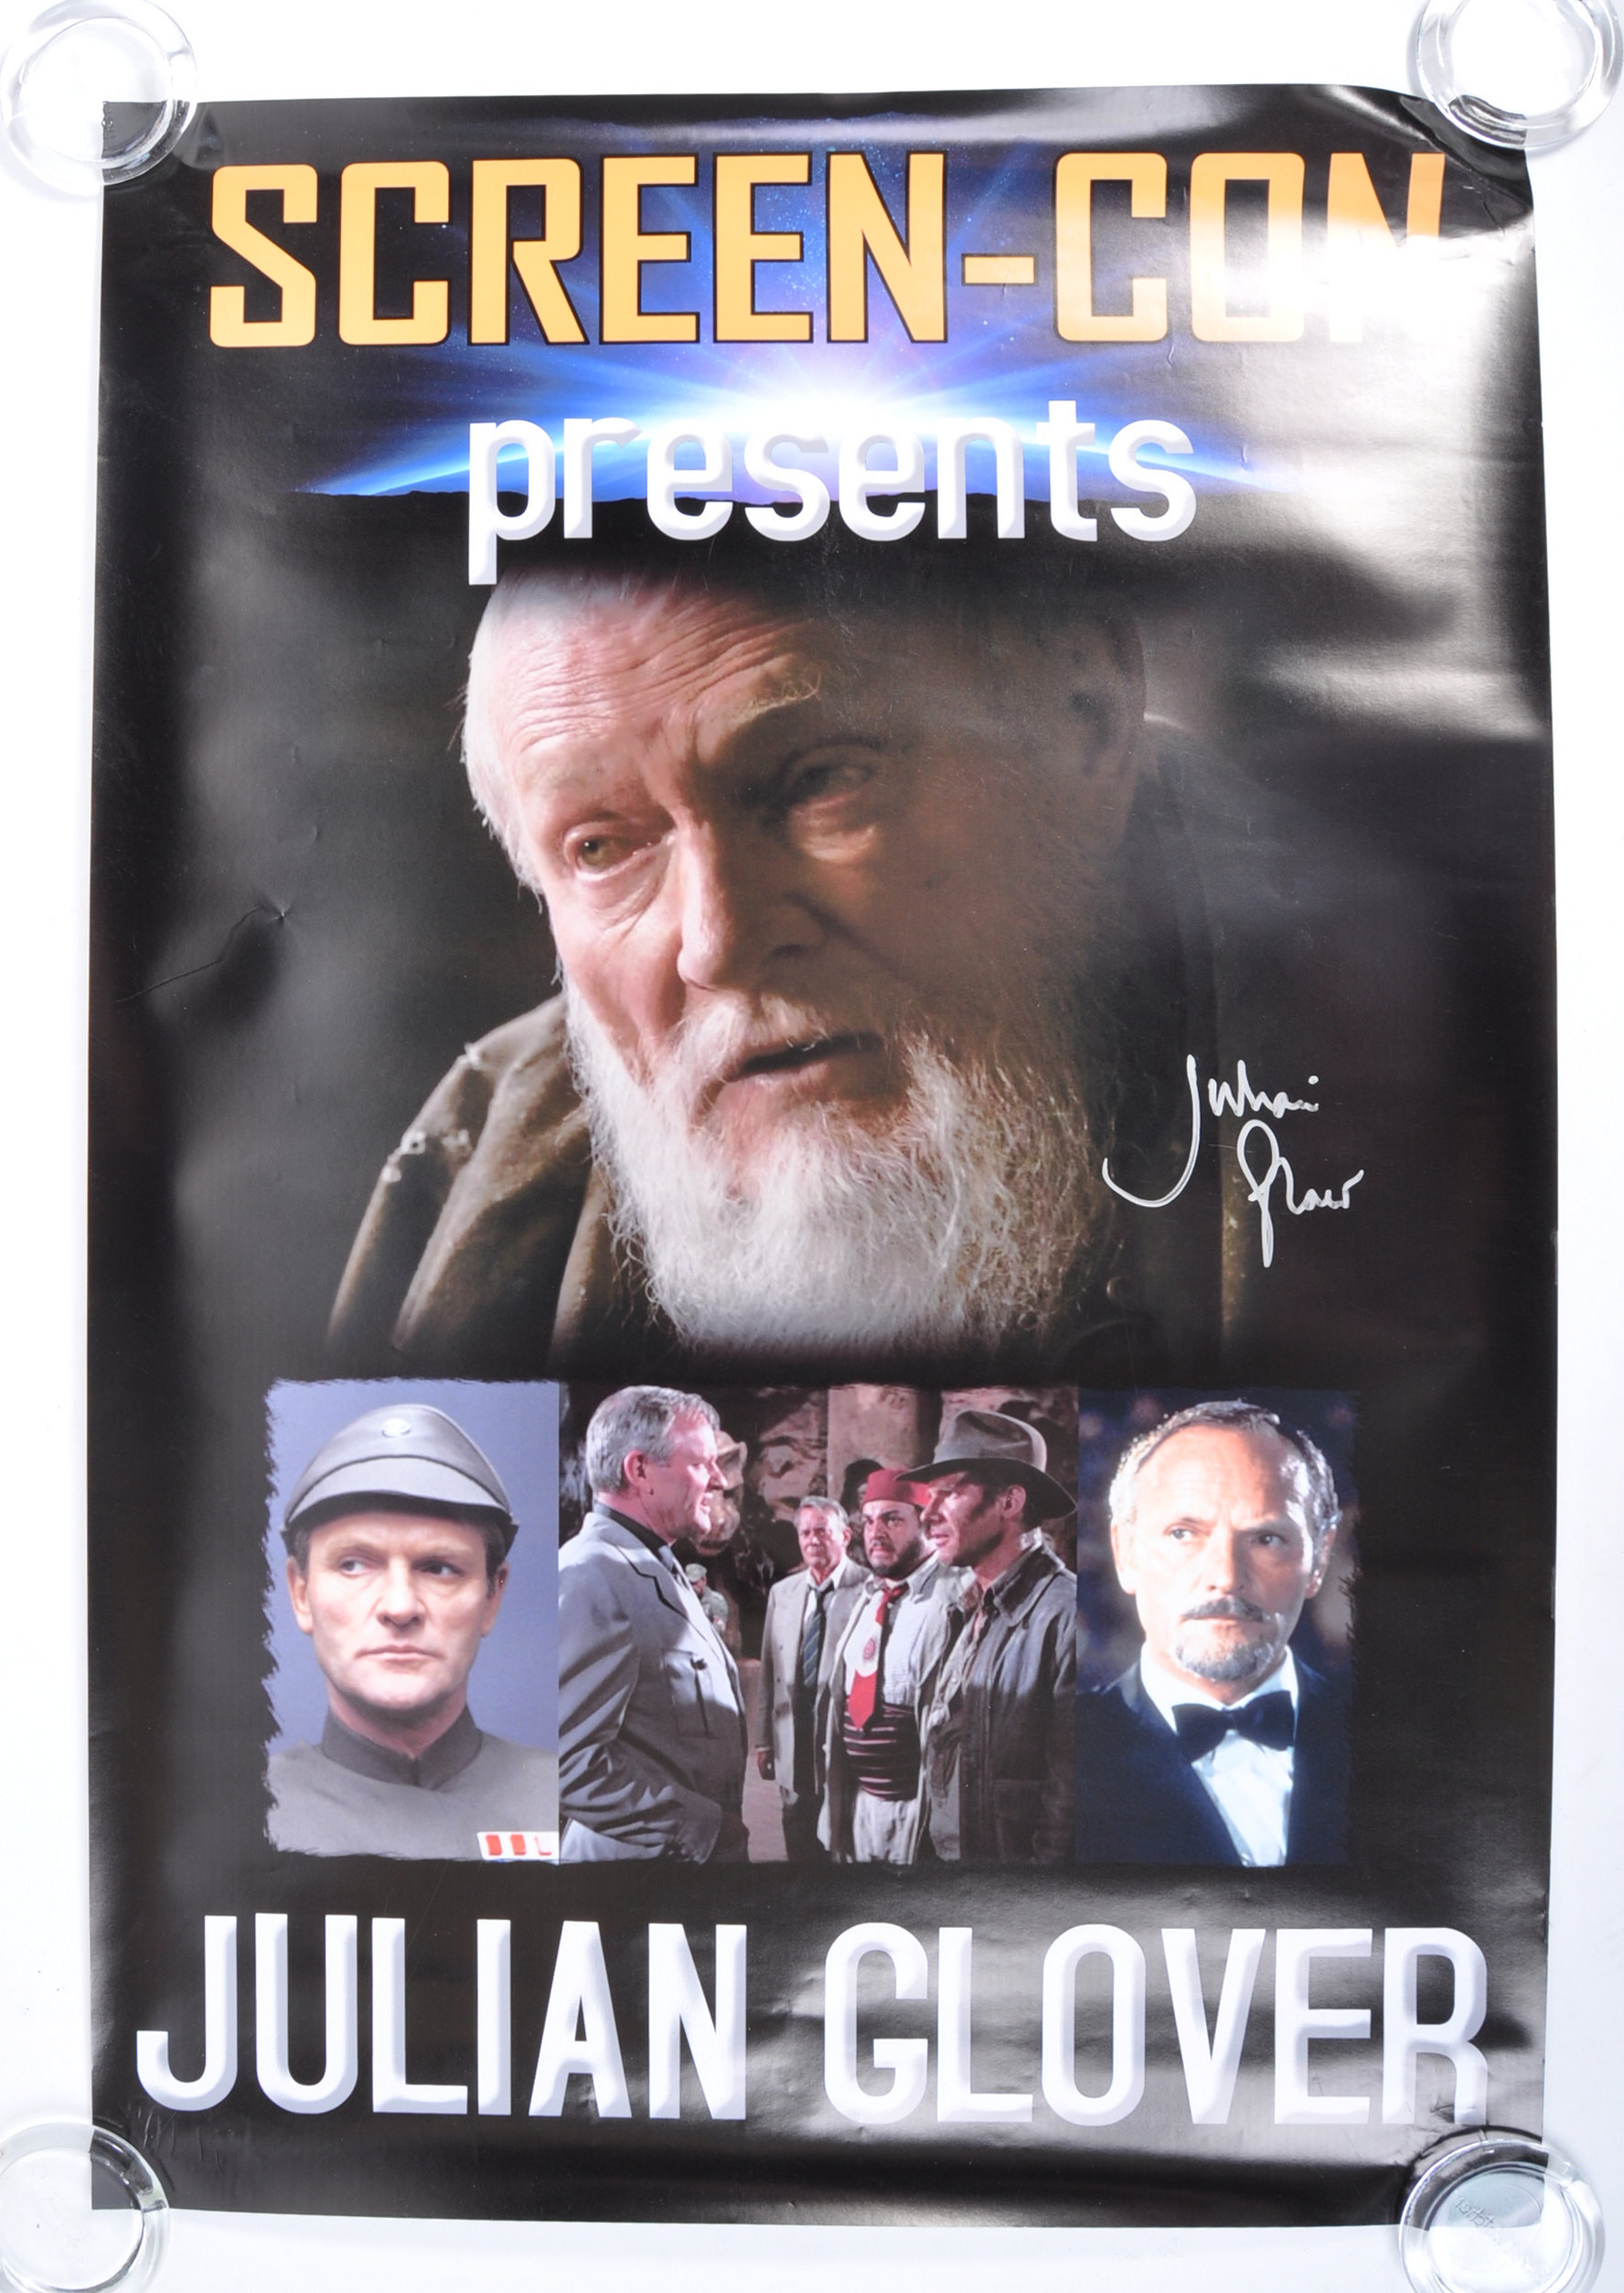 JULIAN GLOVER - SCREEN CON - AUTOGRAPHED EVENTS POSTER